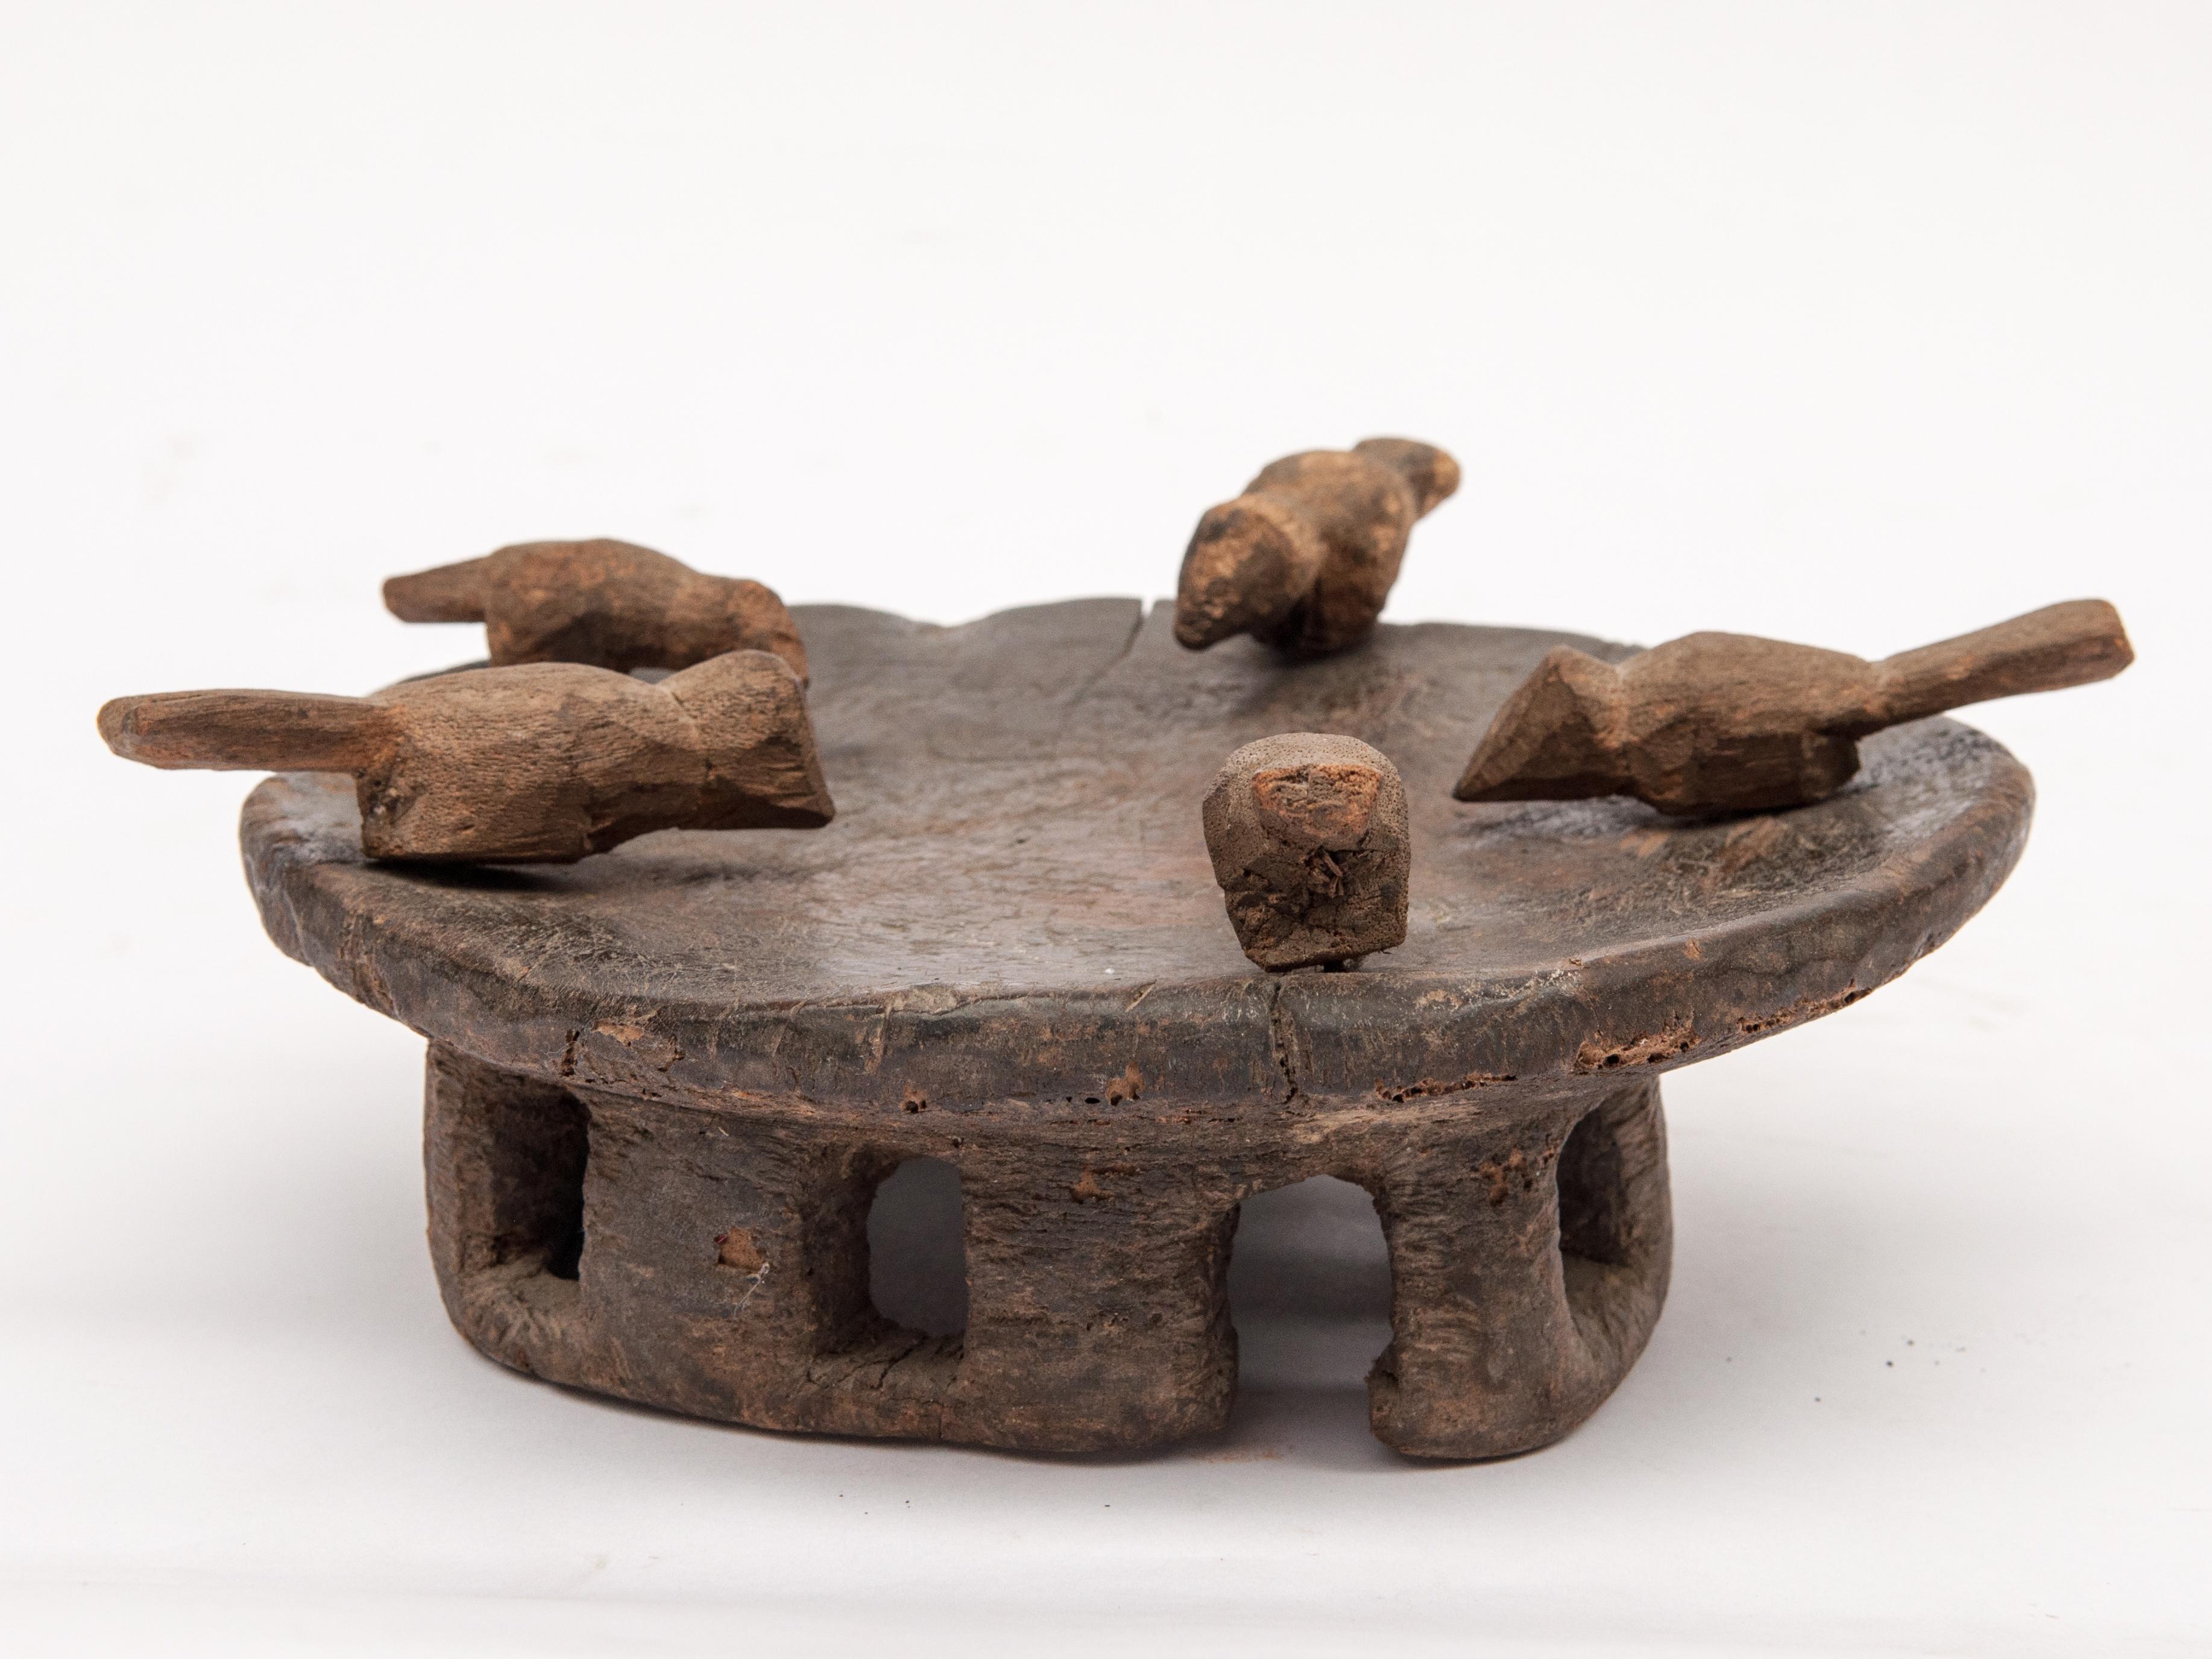 Ceremonial wooden offering tray with birds from the Naga of Northeast India. Early to mid-20th century.
This small, rustic and utterly charming tray comes from the Naga of Northeast India, where it was used to present ceremonial offerings to the